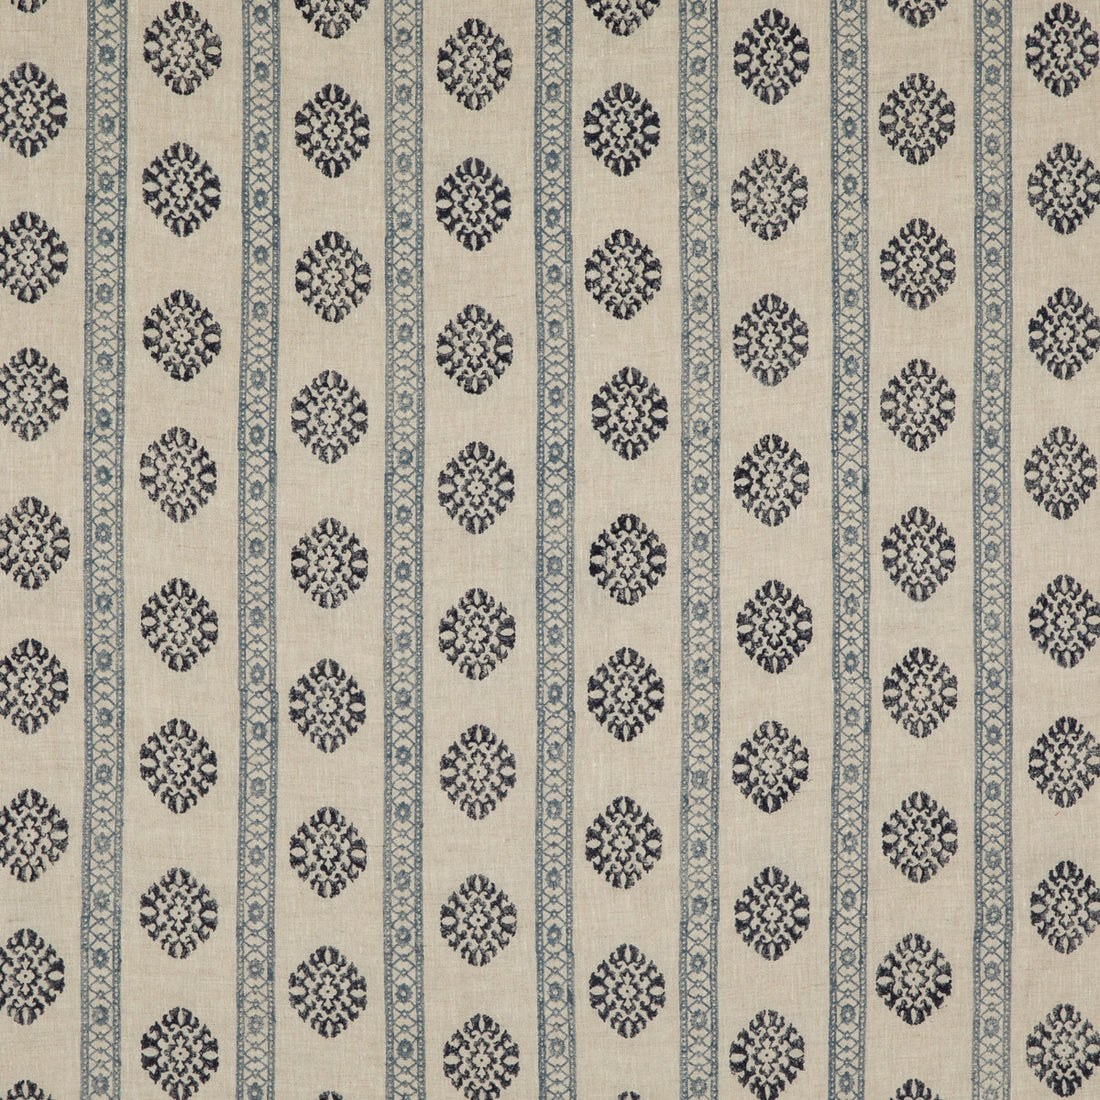 Alma fabric in indigo color - pattern BP10821.2.0 - by G P &amp; J Baker in the Coromandel Small Prints collection